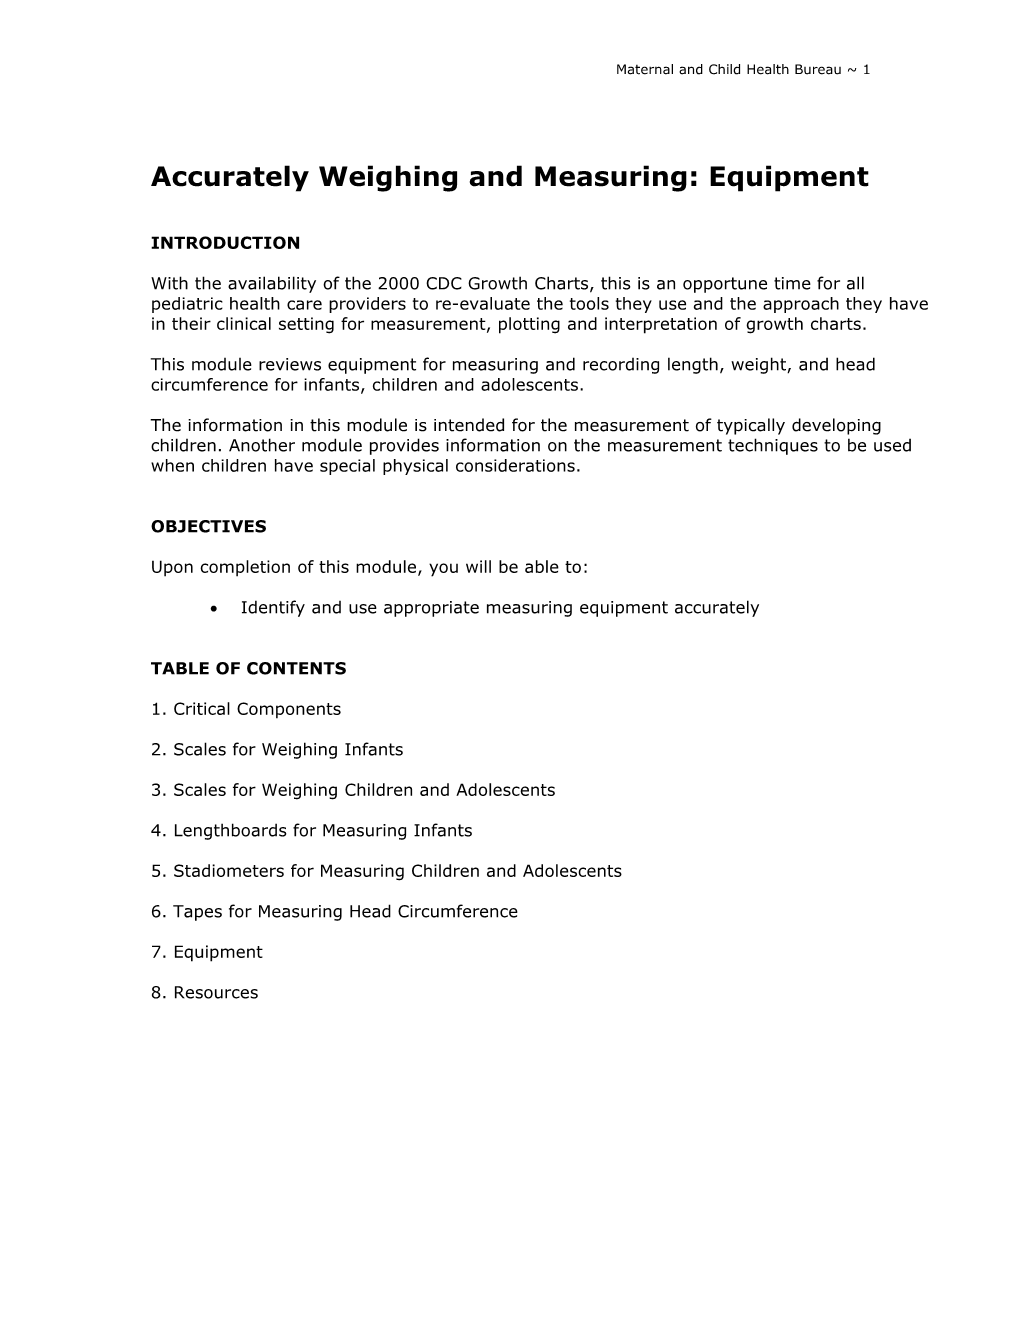 Accurately Weighing and Measuring: Equipment